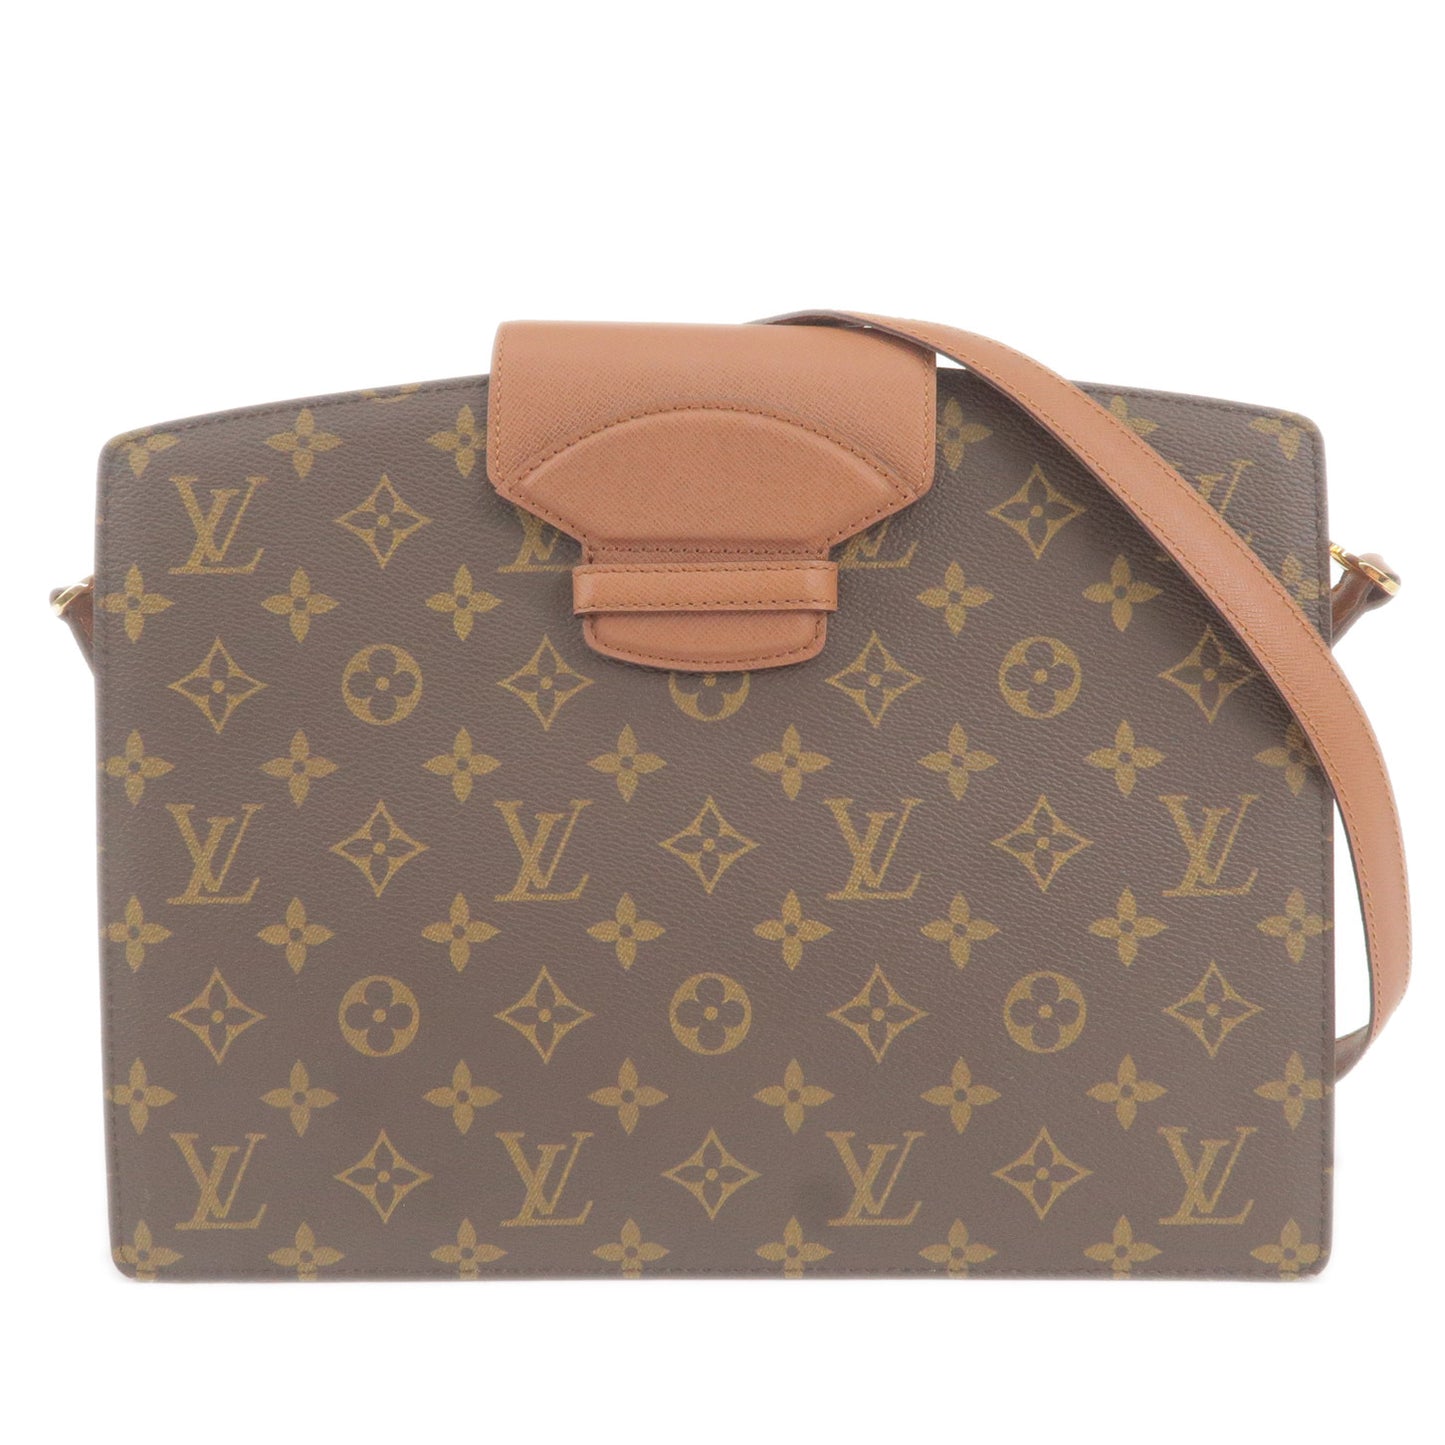 Louis Vuitton x Karl Lagerfeld 2014 pre-owned Punching PM Shoulder